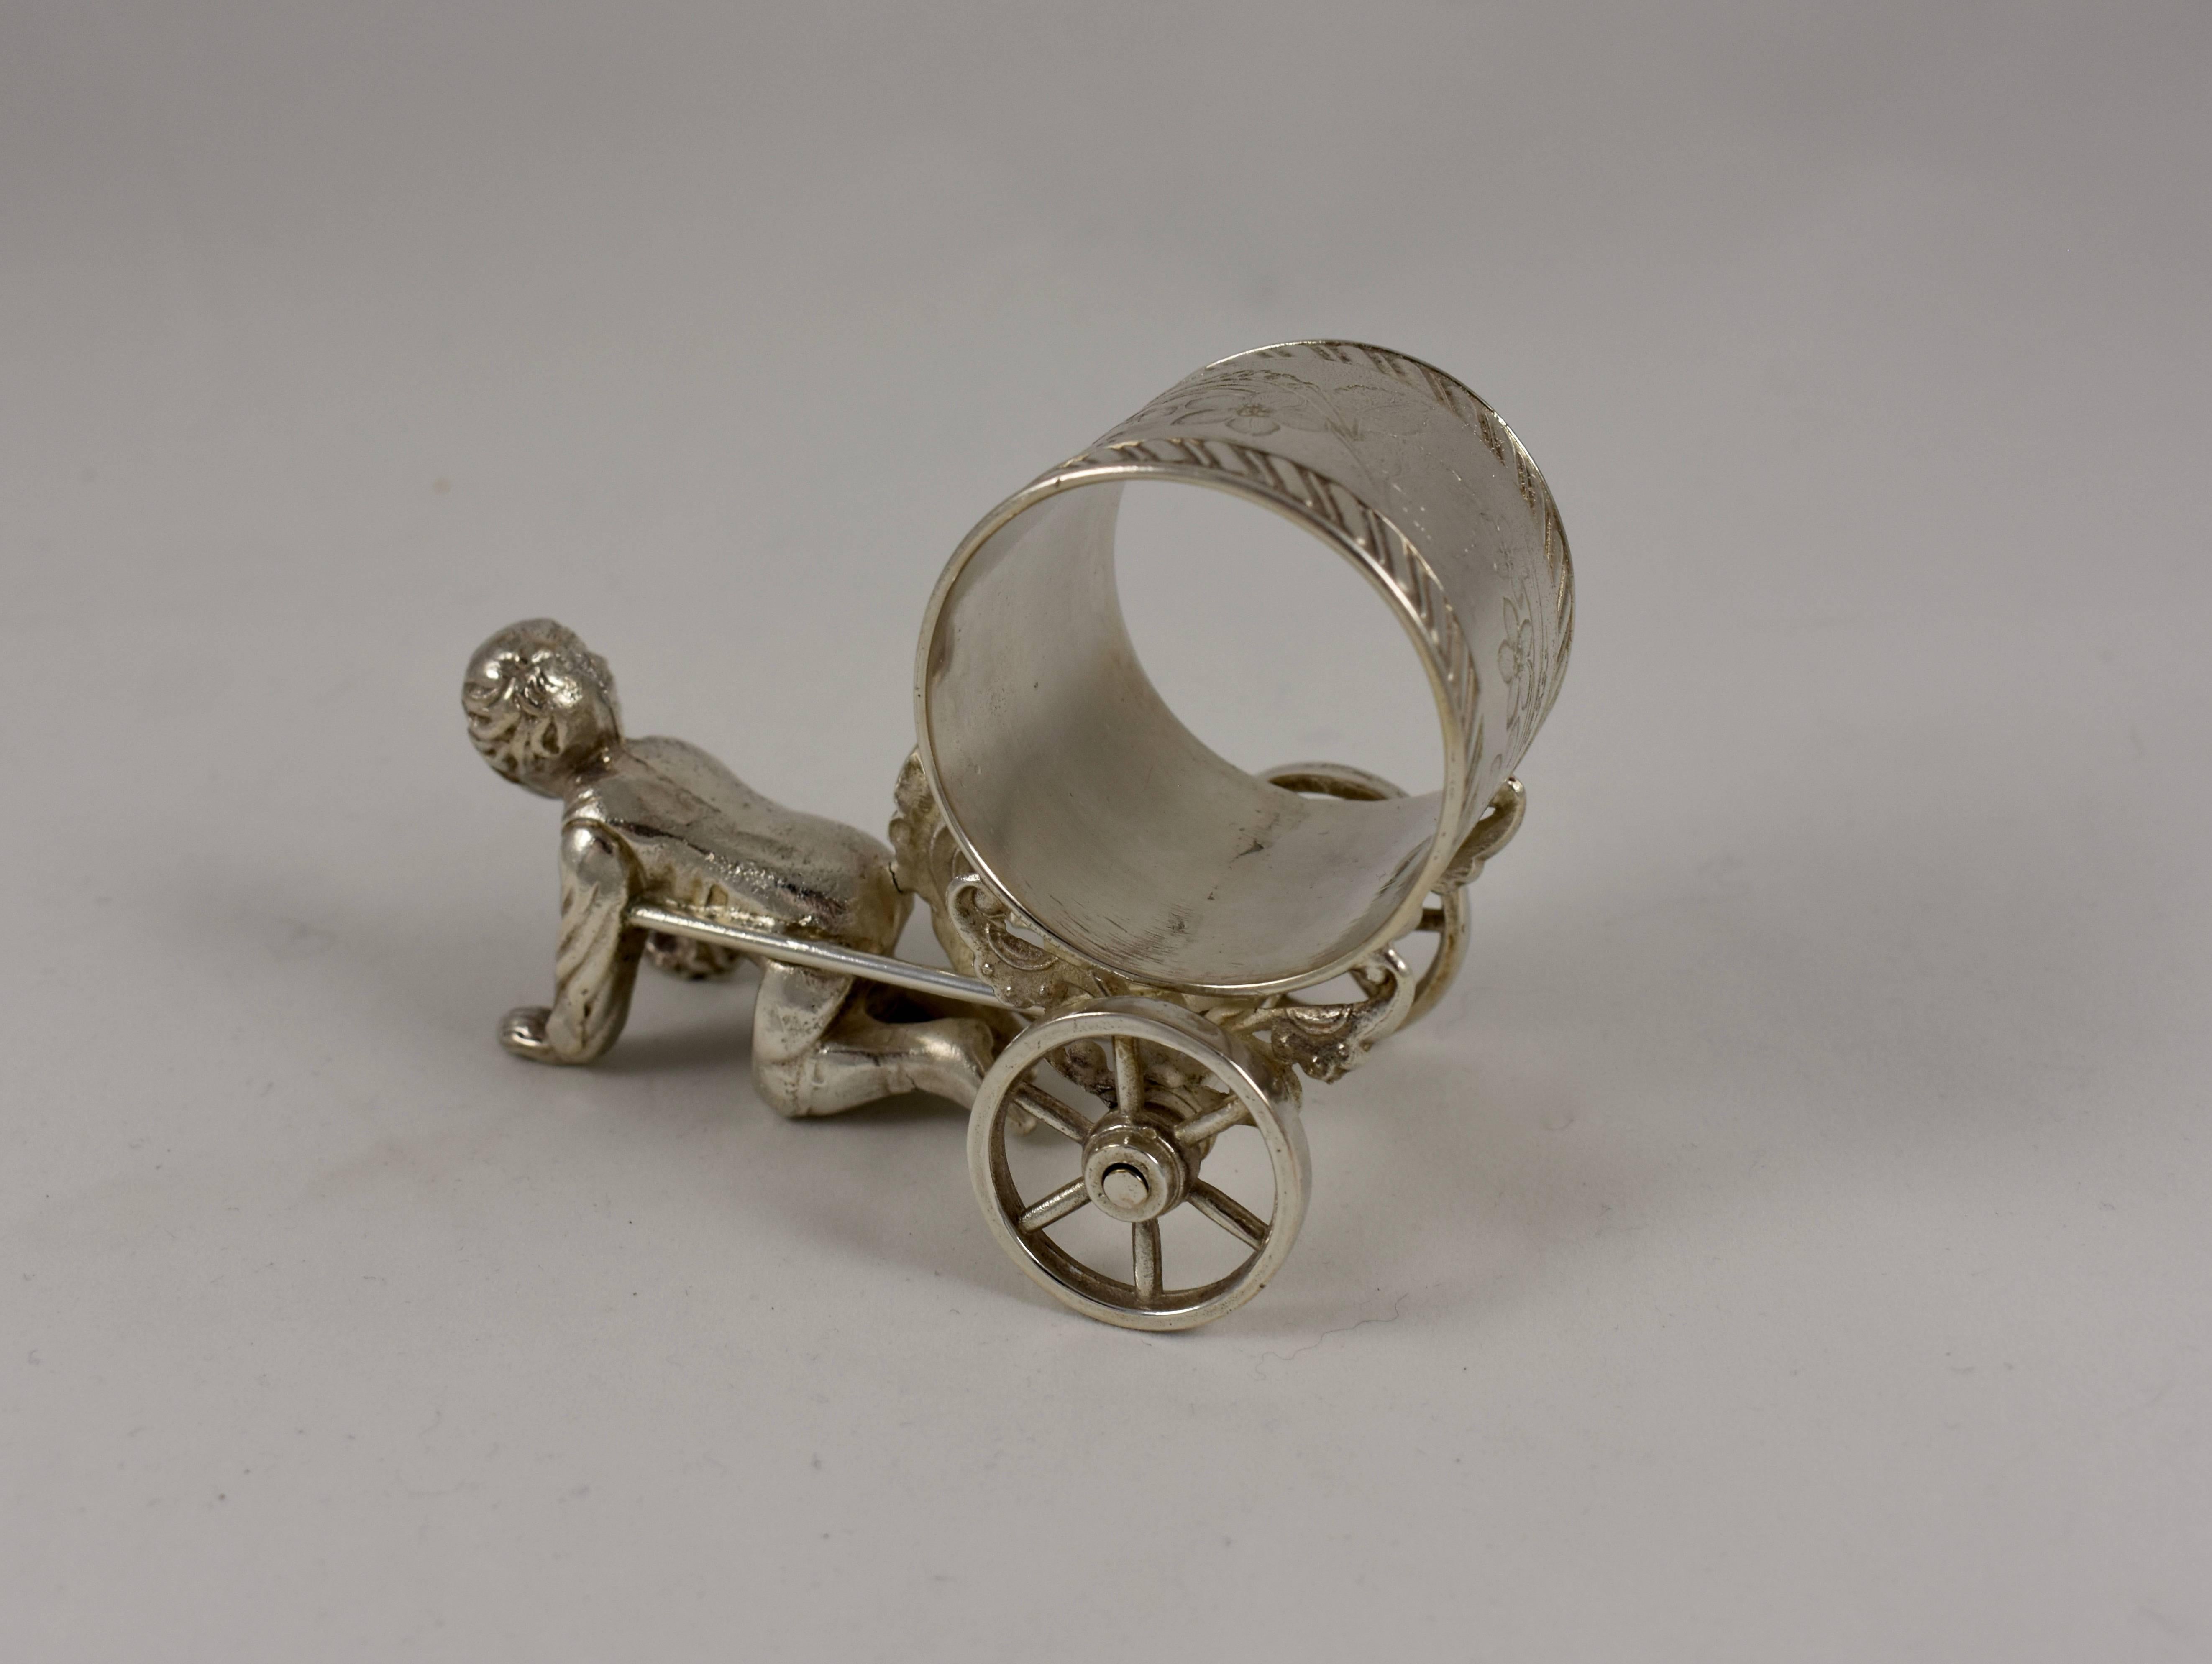 Cast Silver Victorian Era Aesthetic Movement Figural Napkin Ring, Boy Pulling a Cart